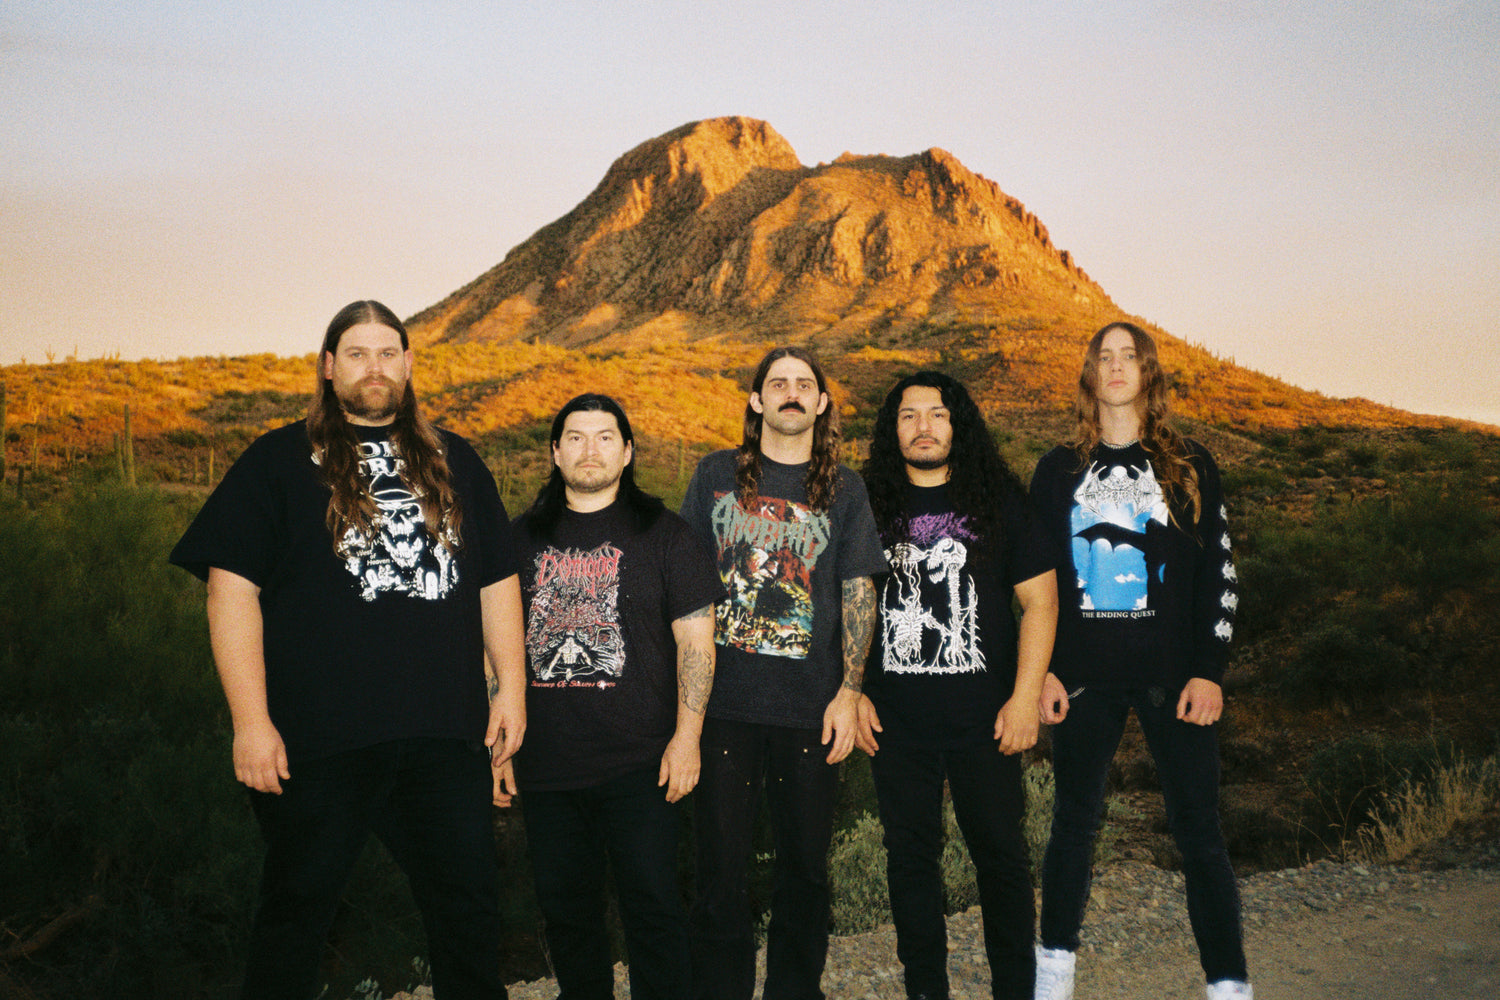 Gatecreeper Make Crushing Return With "Caught In the Treads"